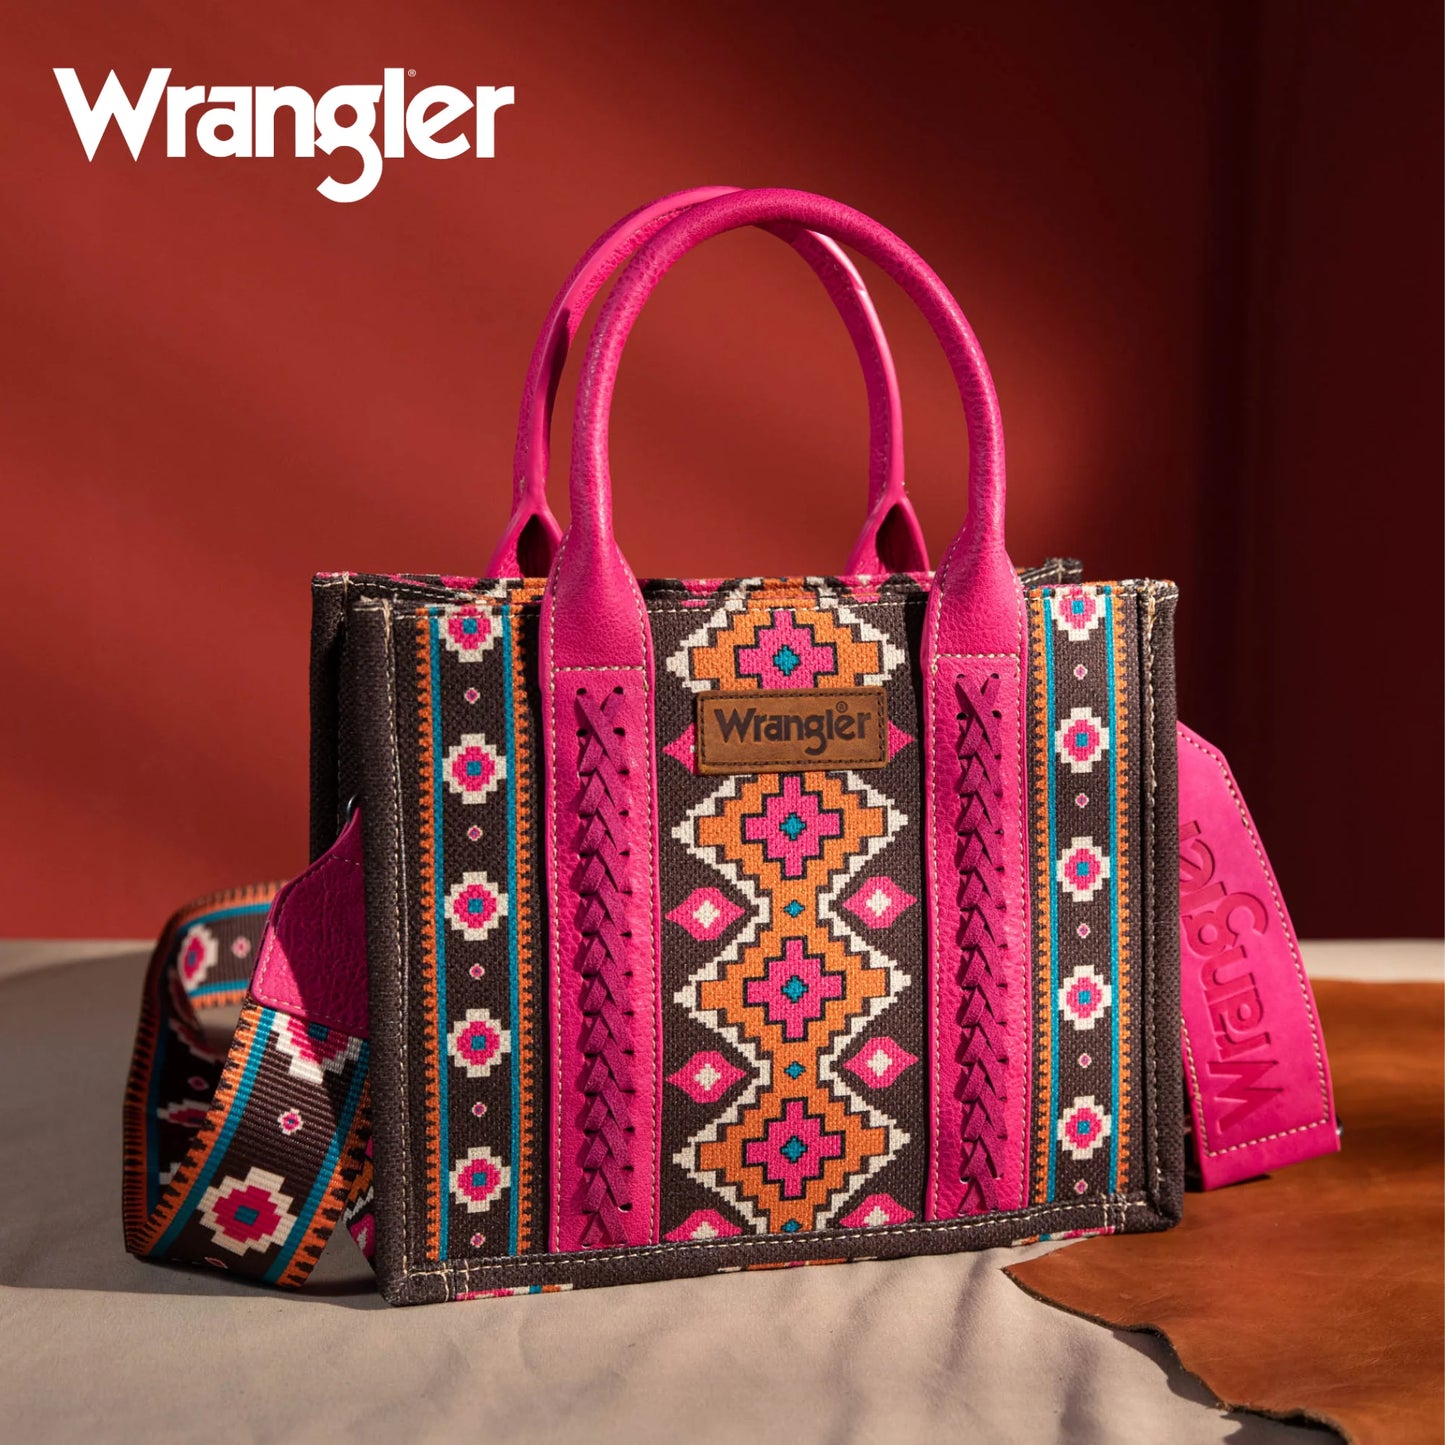 Wrangler leather TOTE purse – Southwest Bedazzle